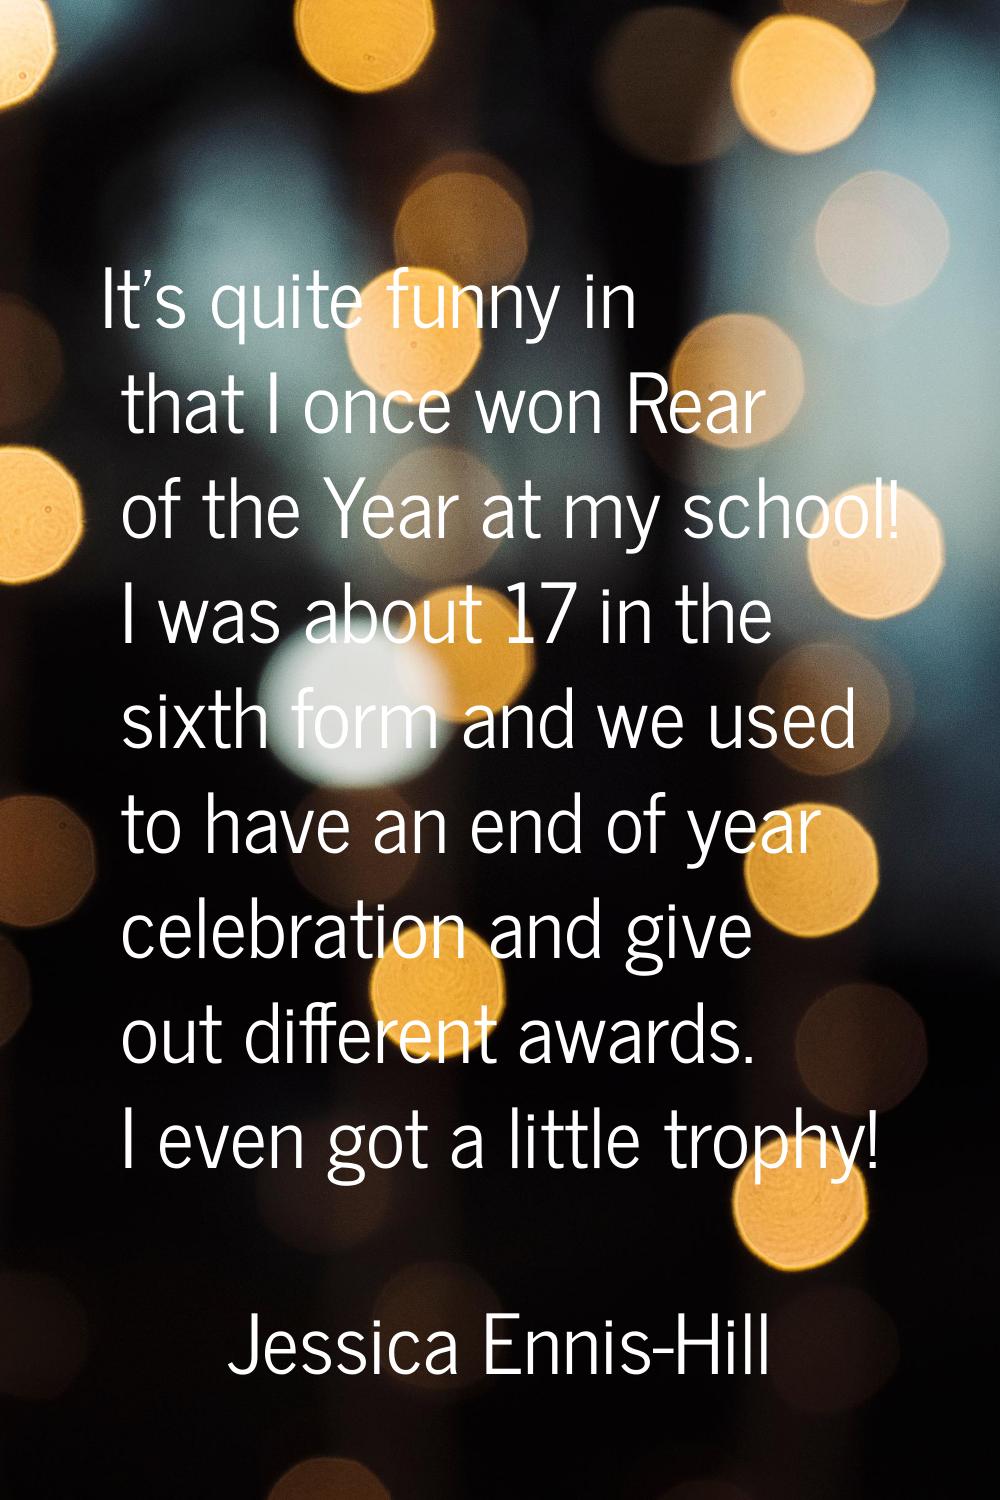 It's quite funny in that I once won Rear of the Year at my school! I was about 17 in the sixth form